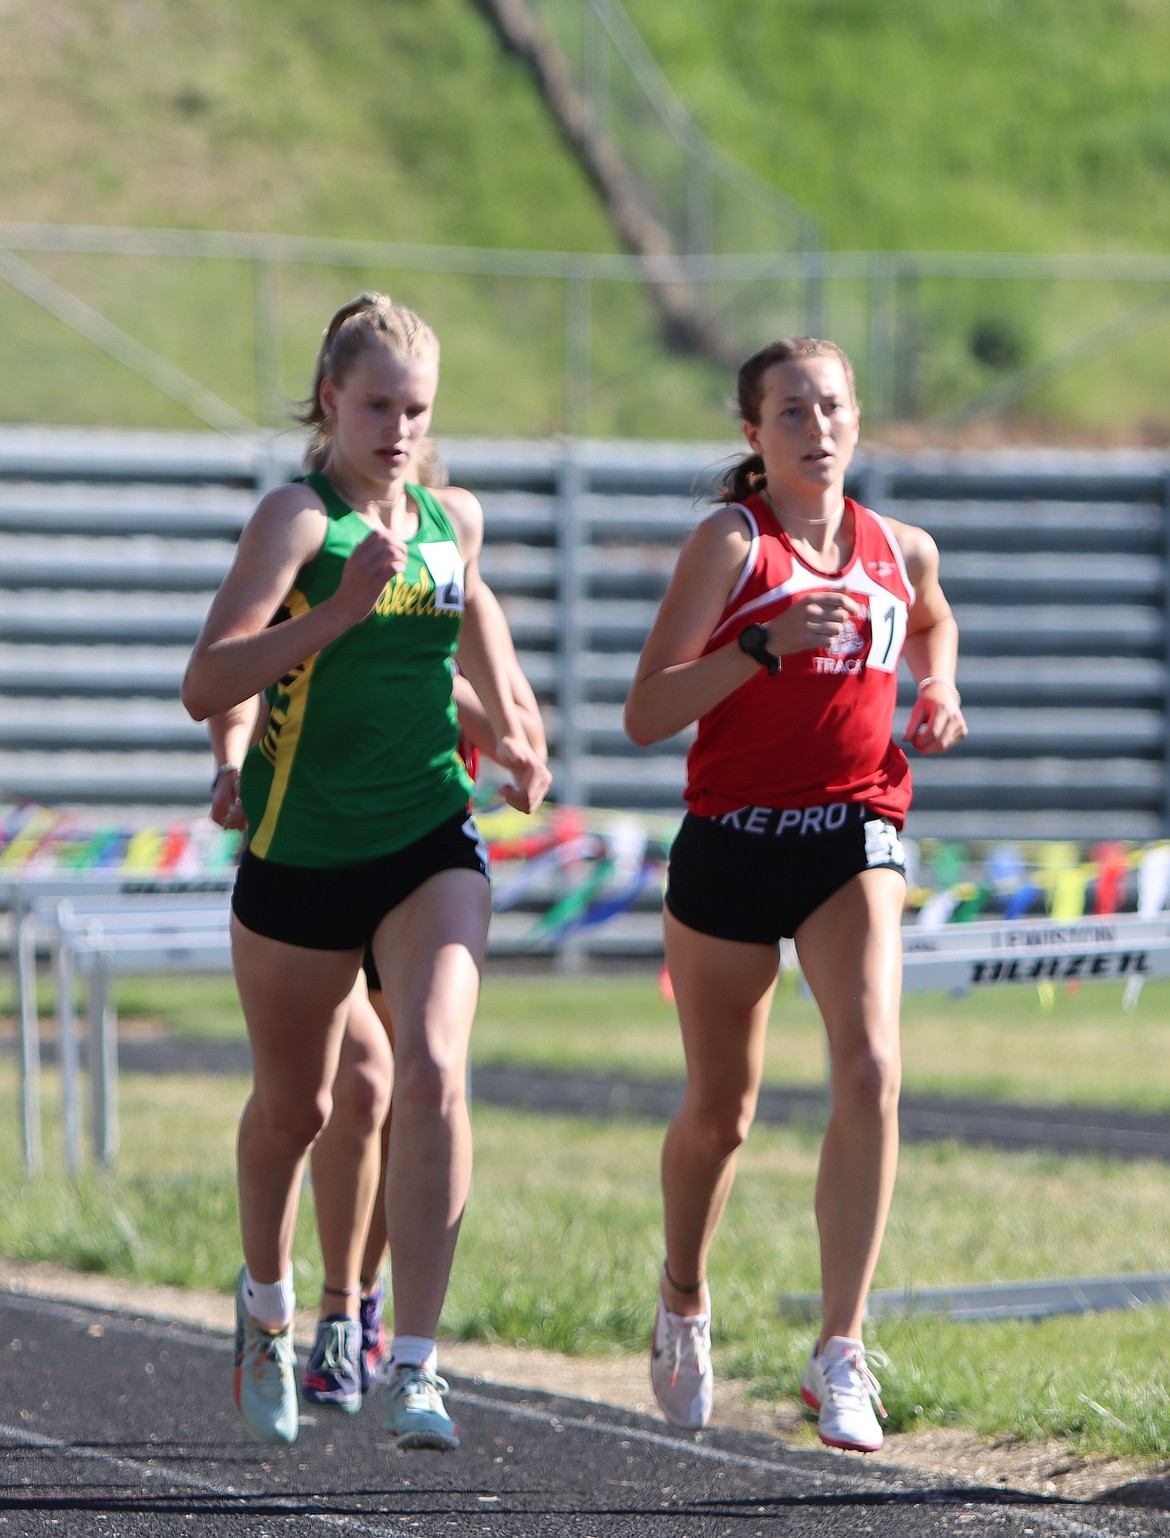 Maren Davidson leads after the first lap of the 800-meter run at the 4A regional championship earlier this season.